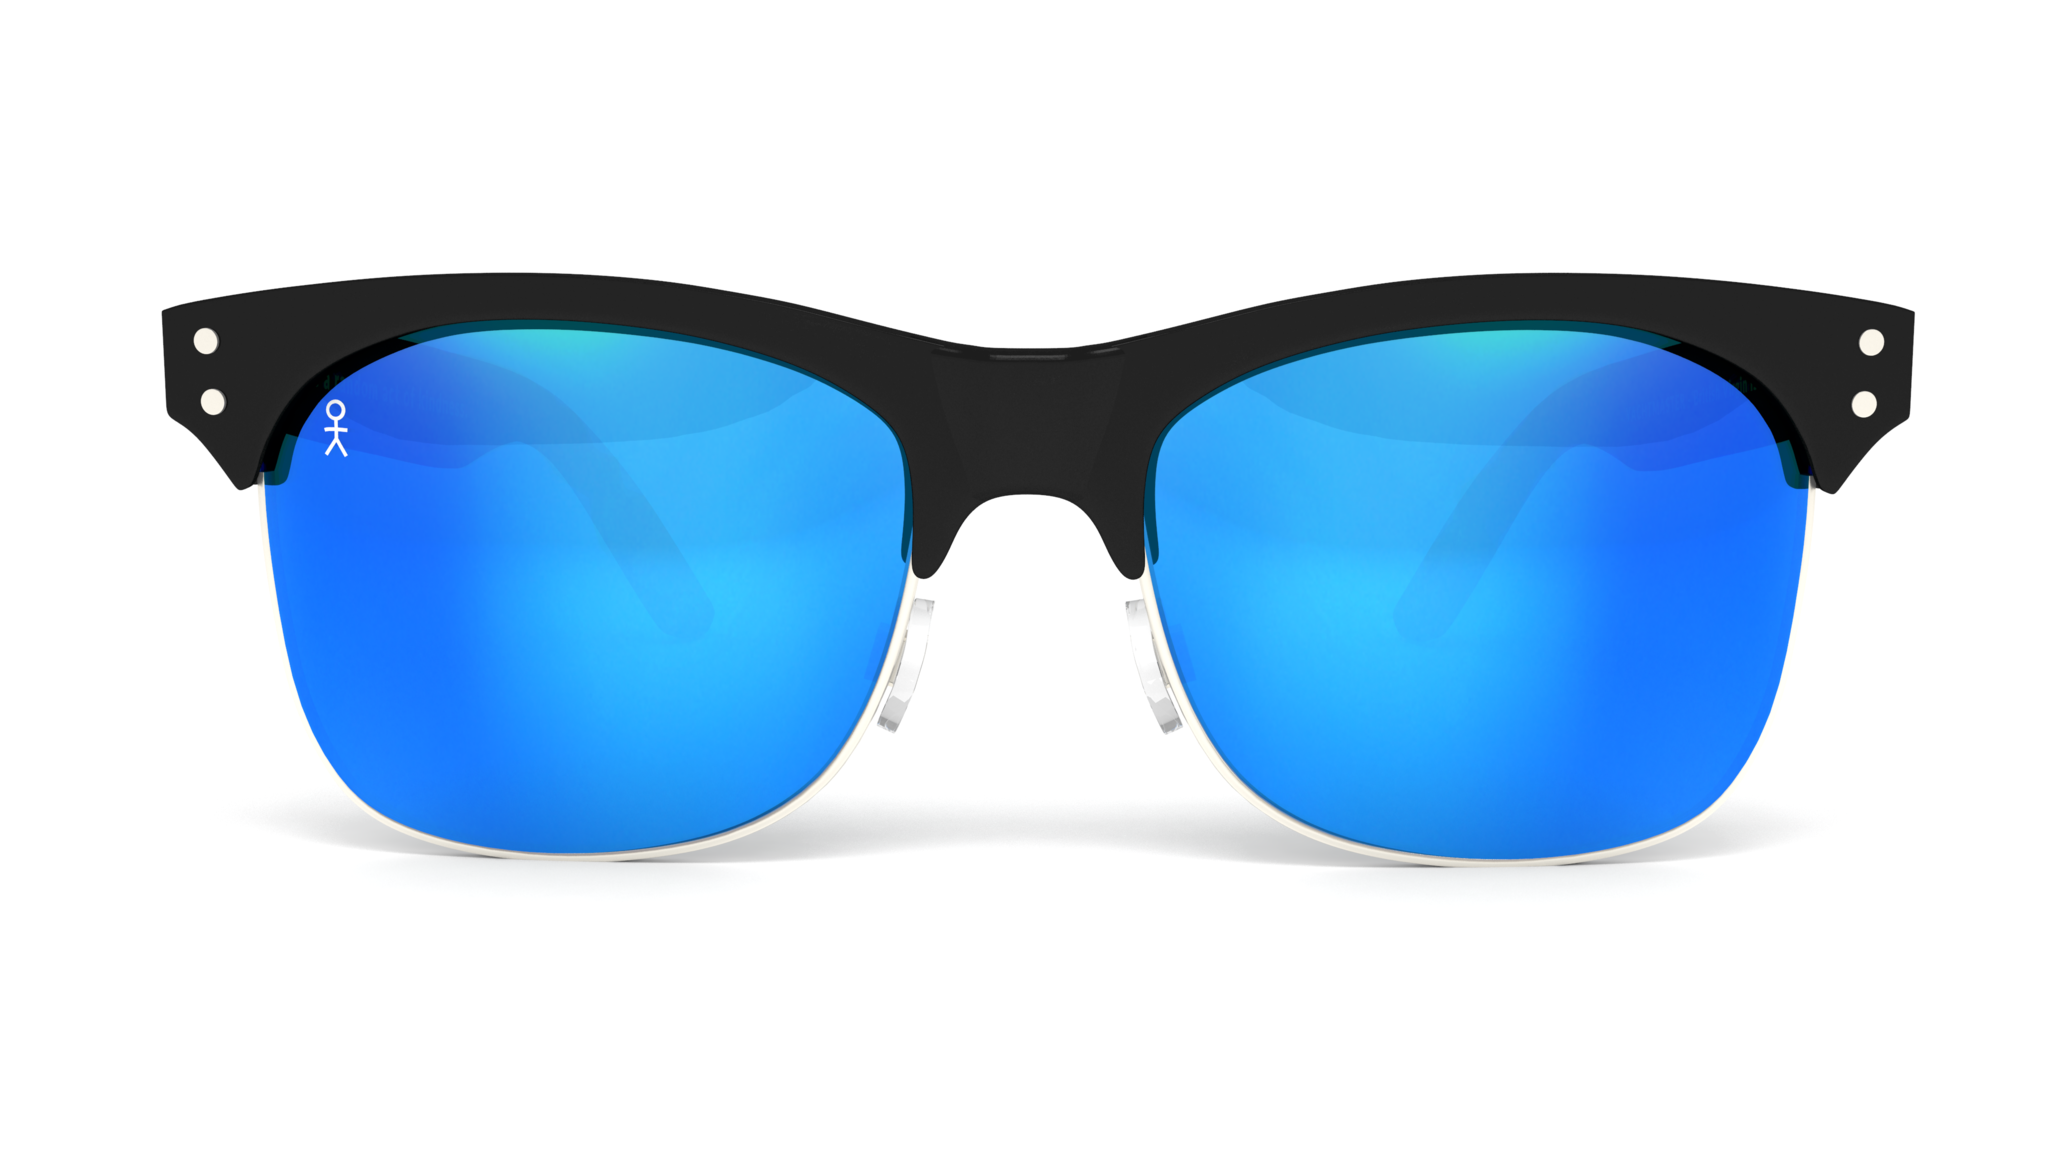 . Hdpng.com Yachtmaster   Bvi   Matte Black With Blue Mirrored Lens   Dicks Cottons Sunglasses   1 Hdpng.com  - Sunglasses, Transparent background PNG HD thumbnail